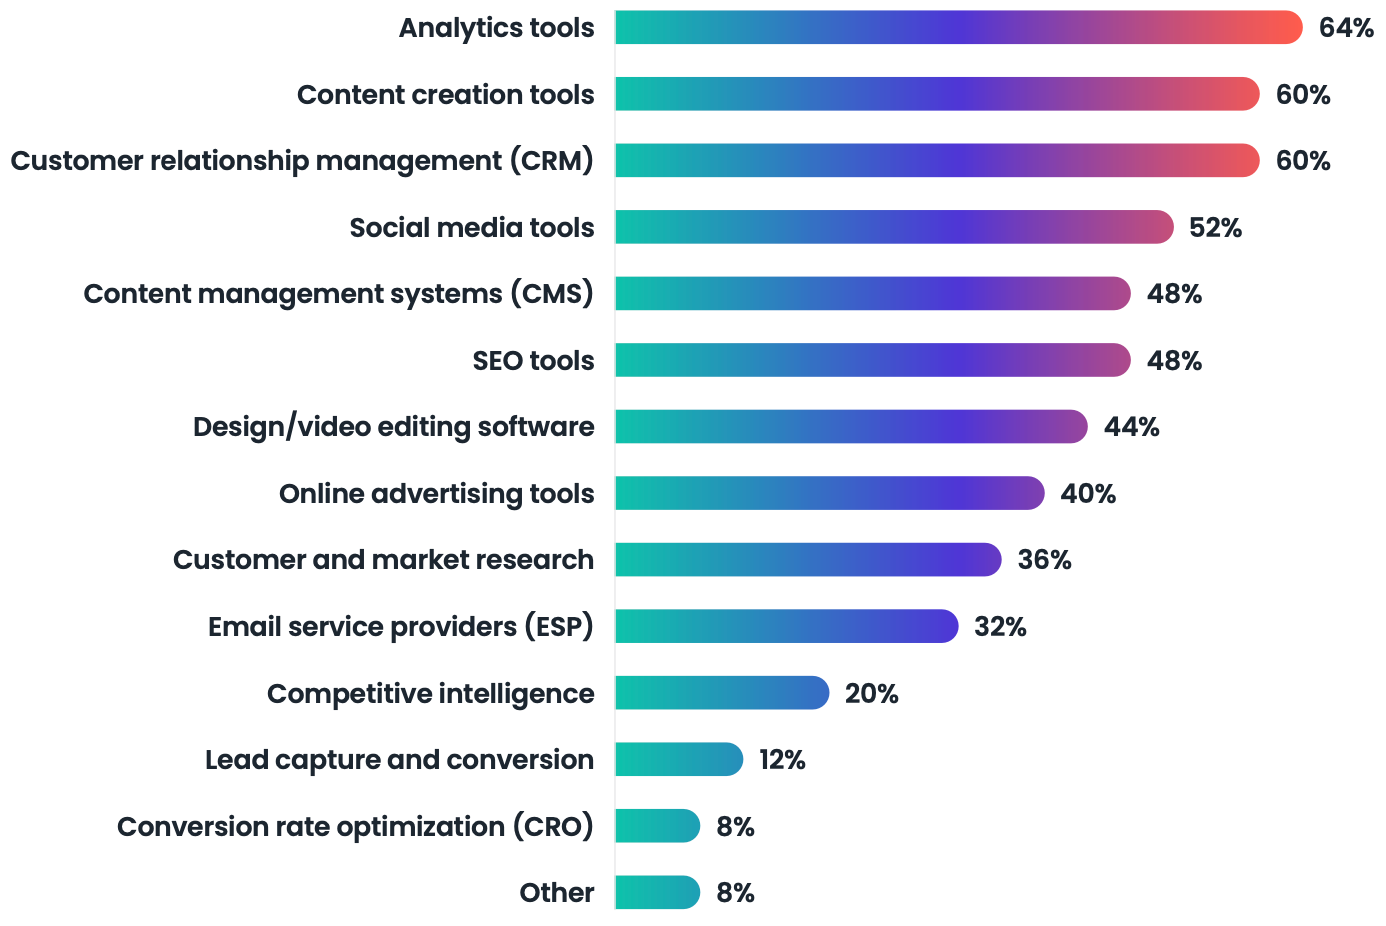 Which software and tools are most popular?